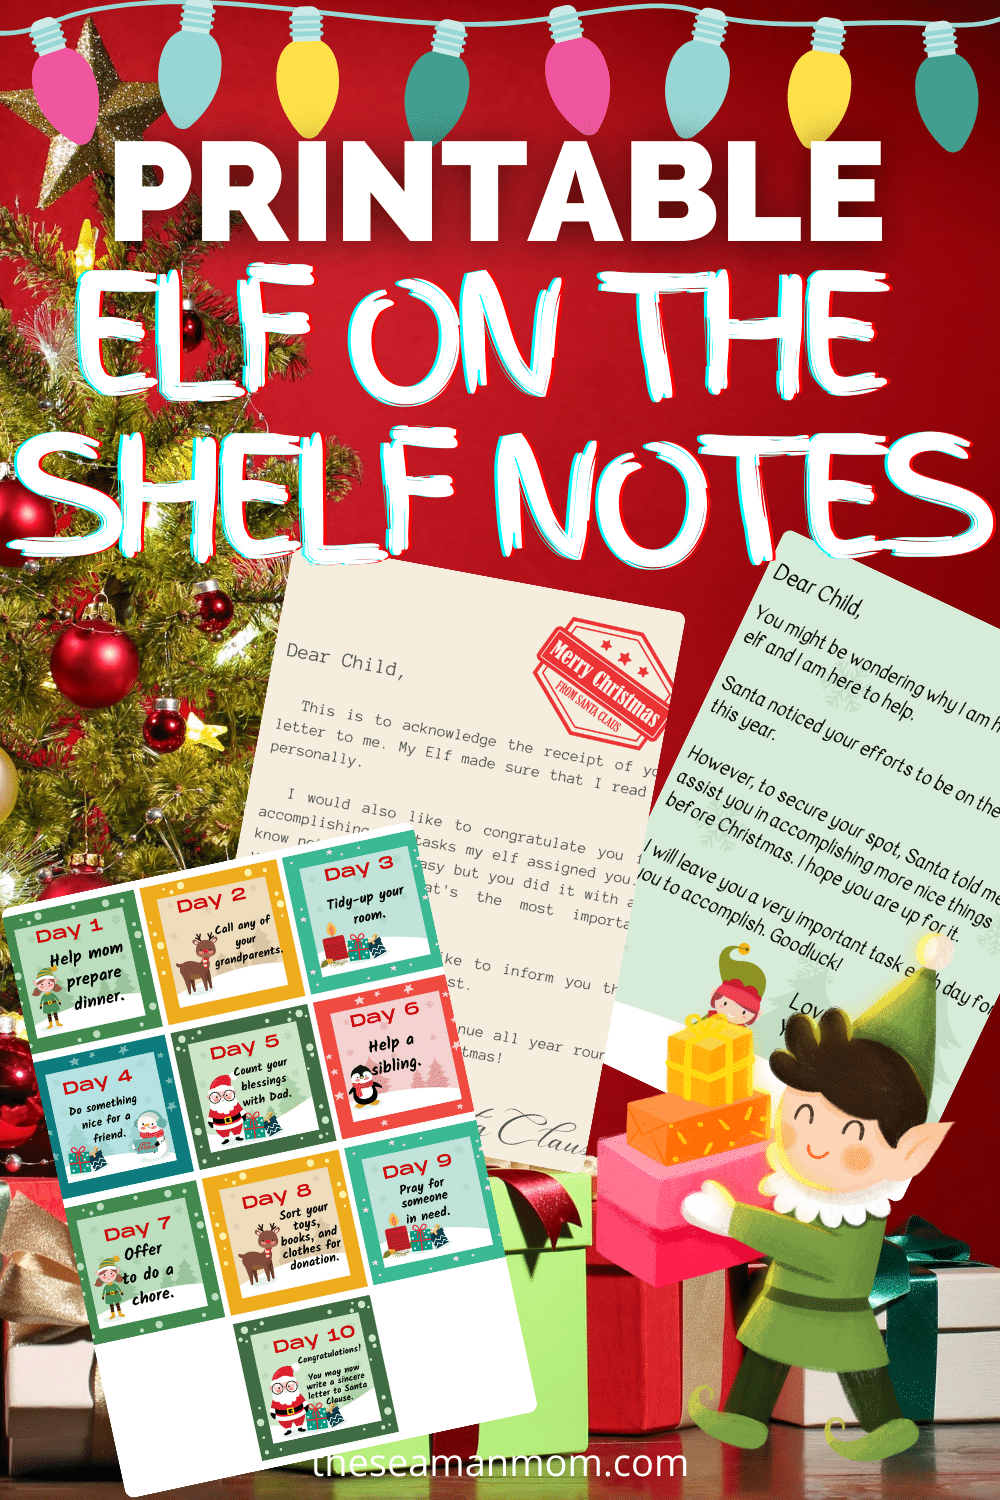 Random acts of kindness are a great way to show your kids you care. Check out this Elf on the shelf printable, filled with great ideas for printable elf on the shelf ideas that will help kids in random acts of kindness. via @petroneagu